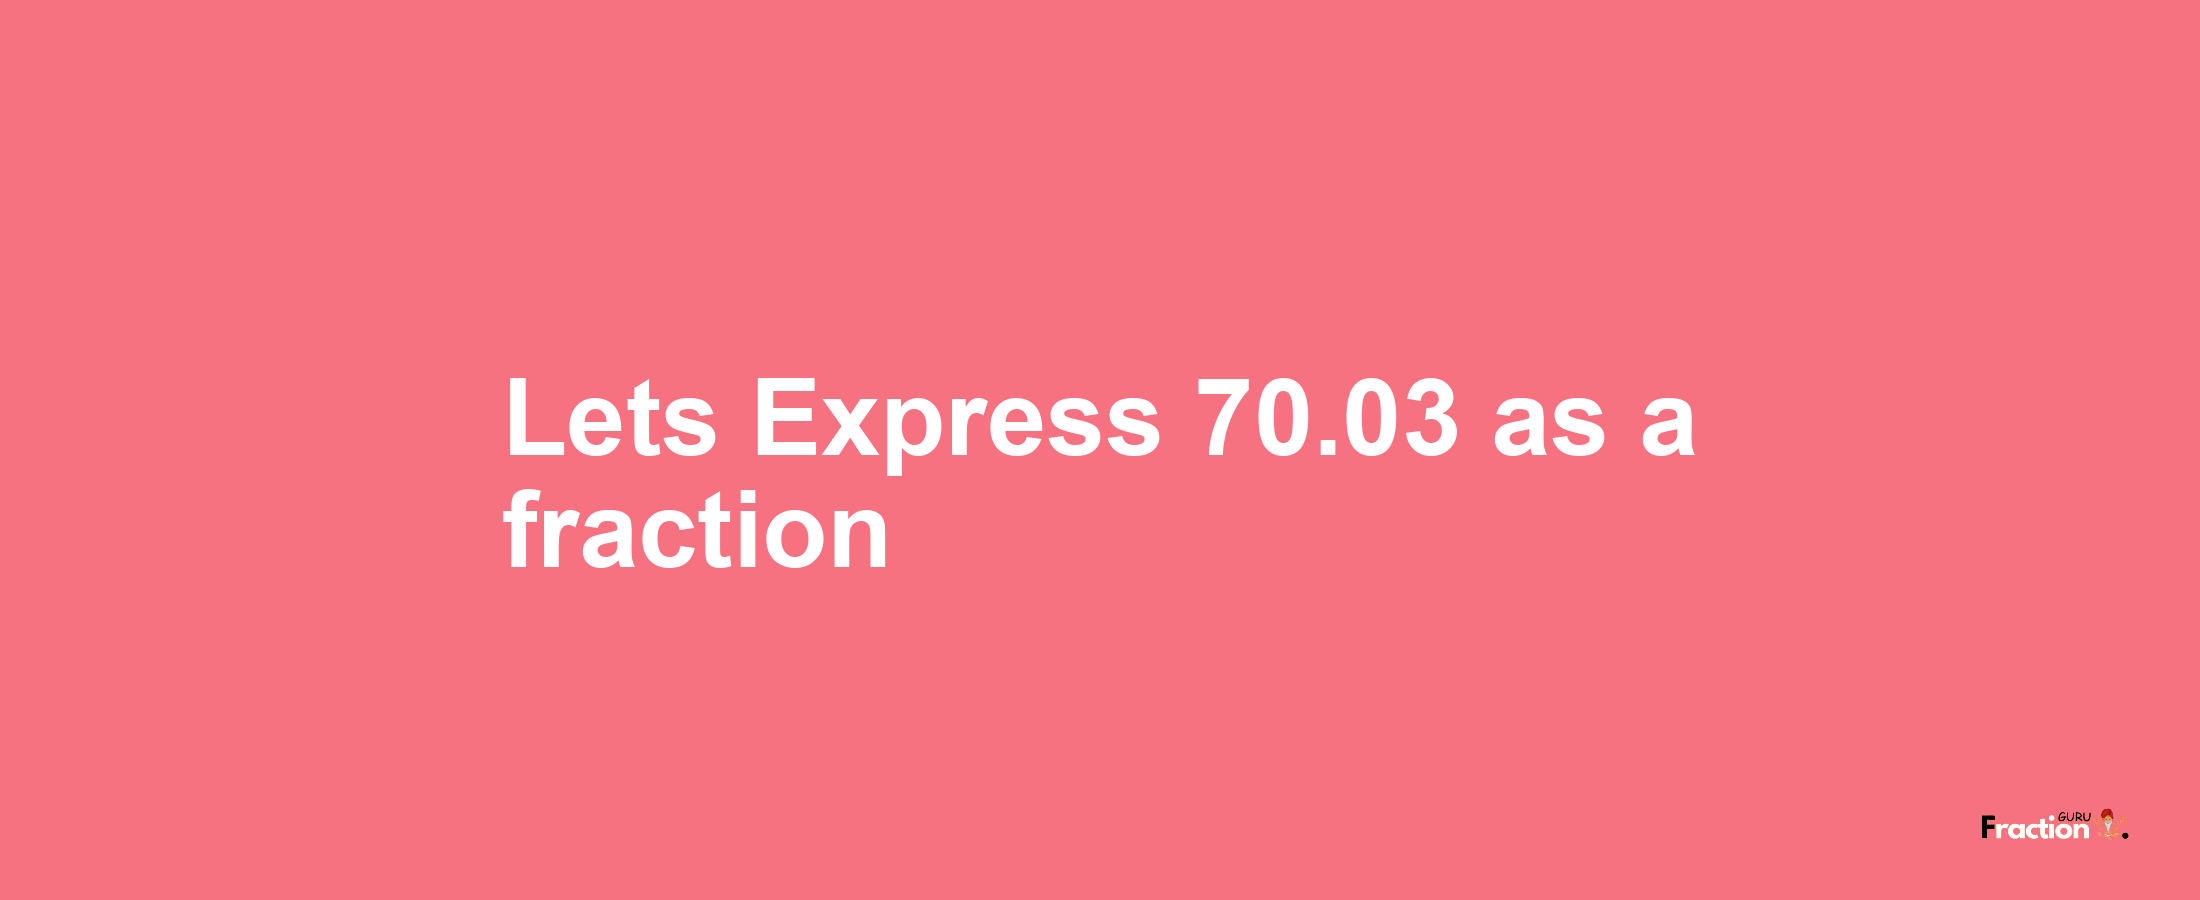 Lets Express 70.03 as afraction